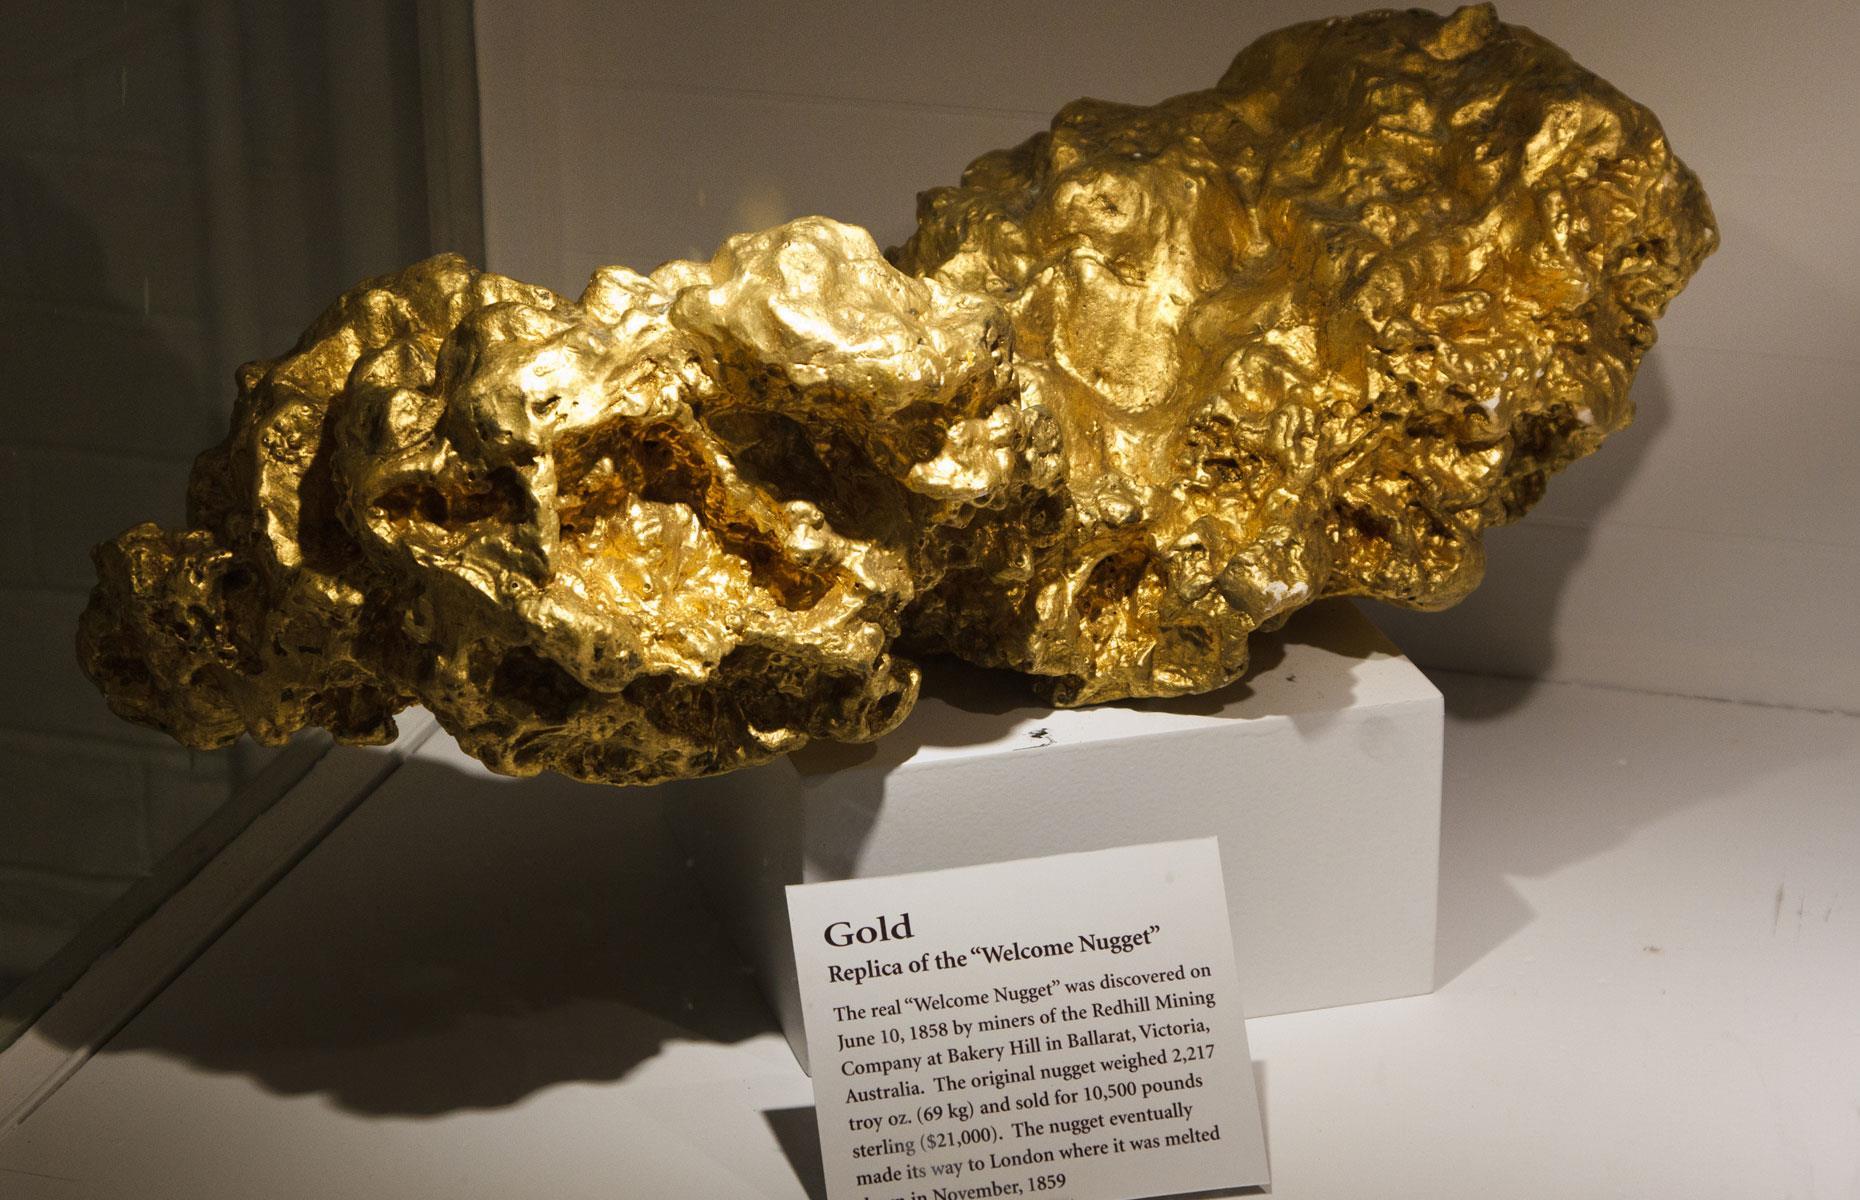 The largest pieces of the precious metal ever discovered